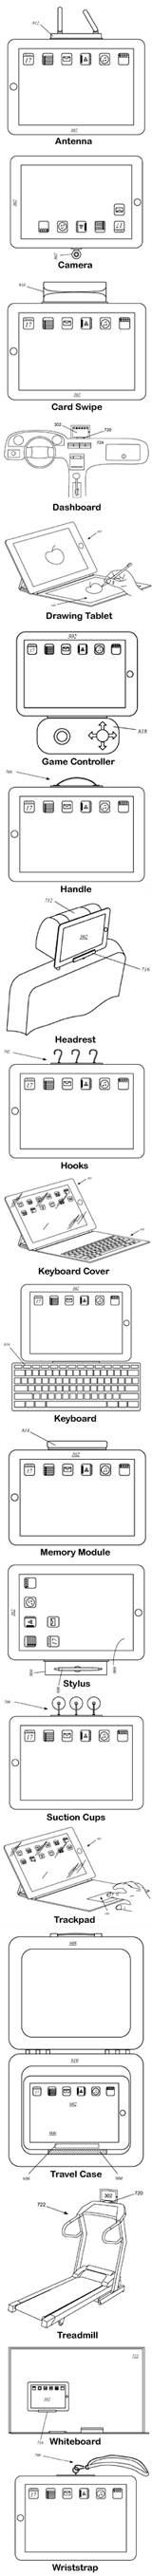 Examples of devices that could be magnetically attached to an iPad, from Apple's 'Magnetic Attachment Unit' patent application